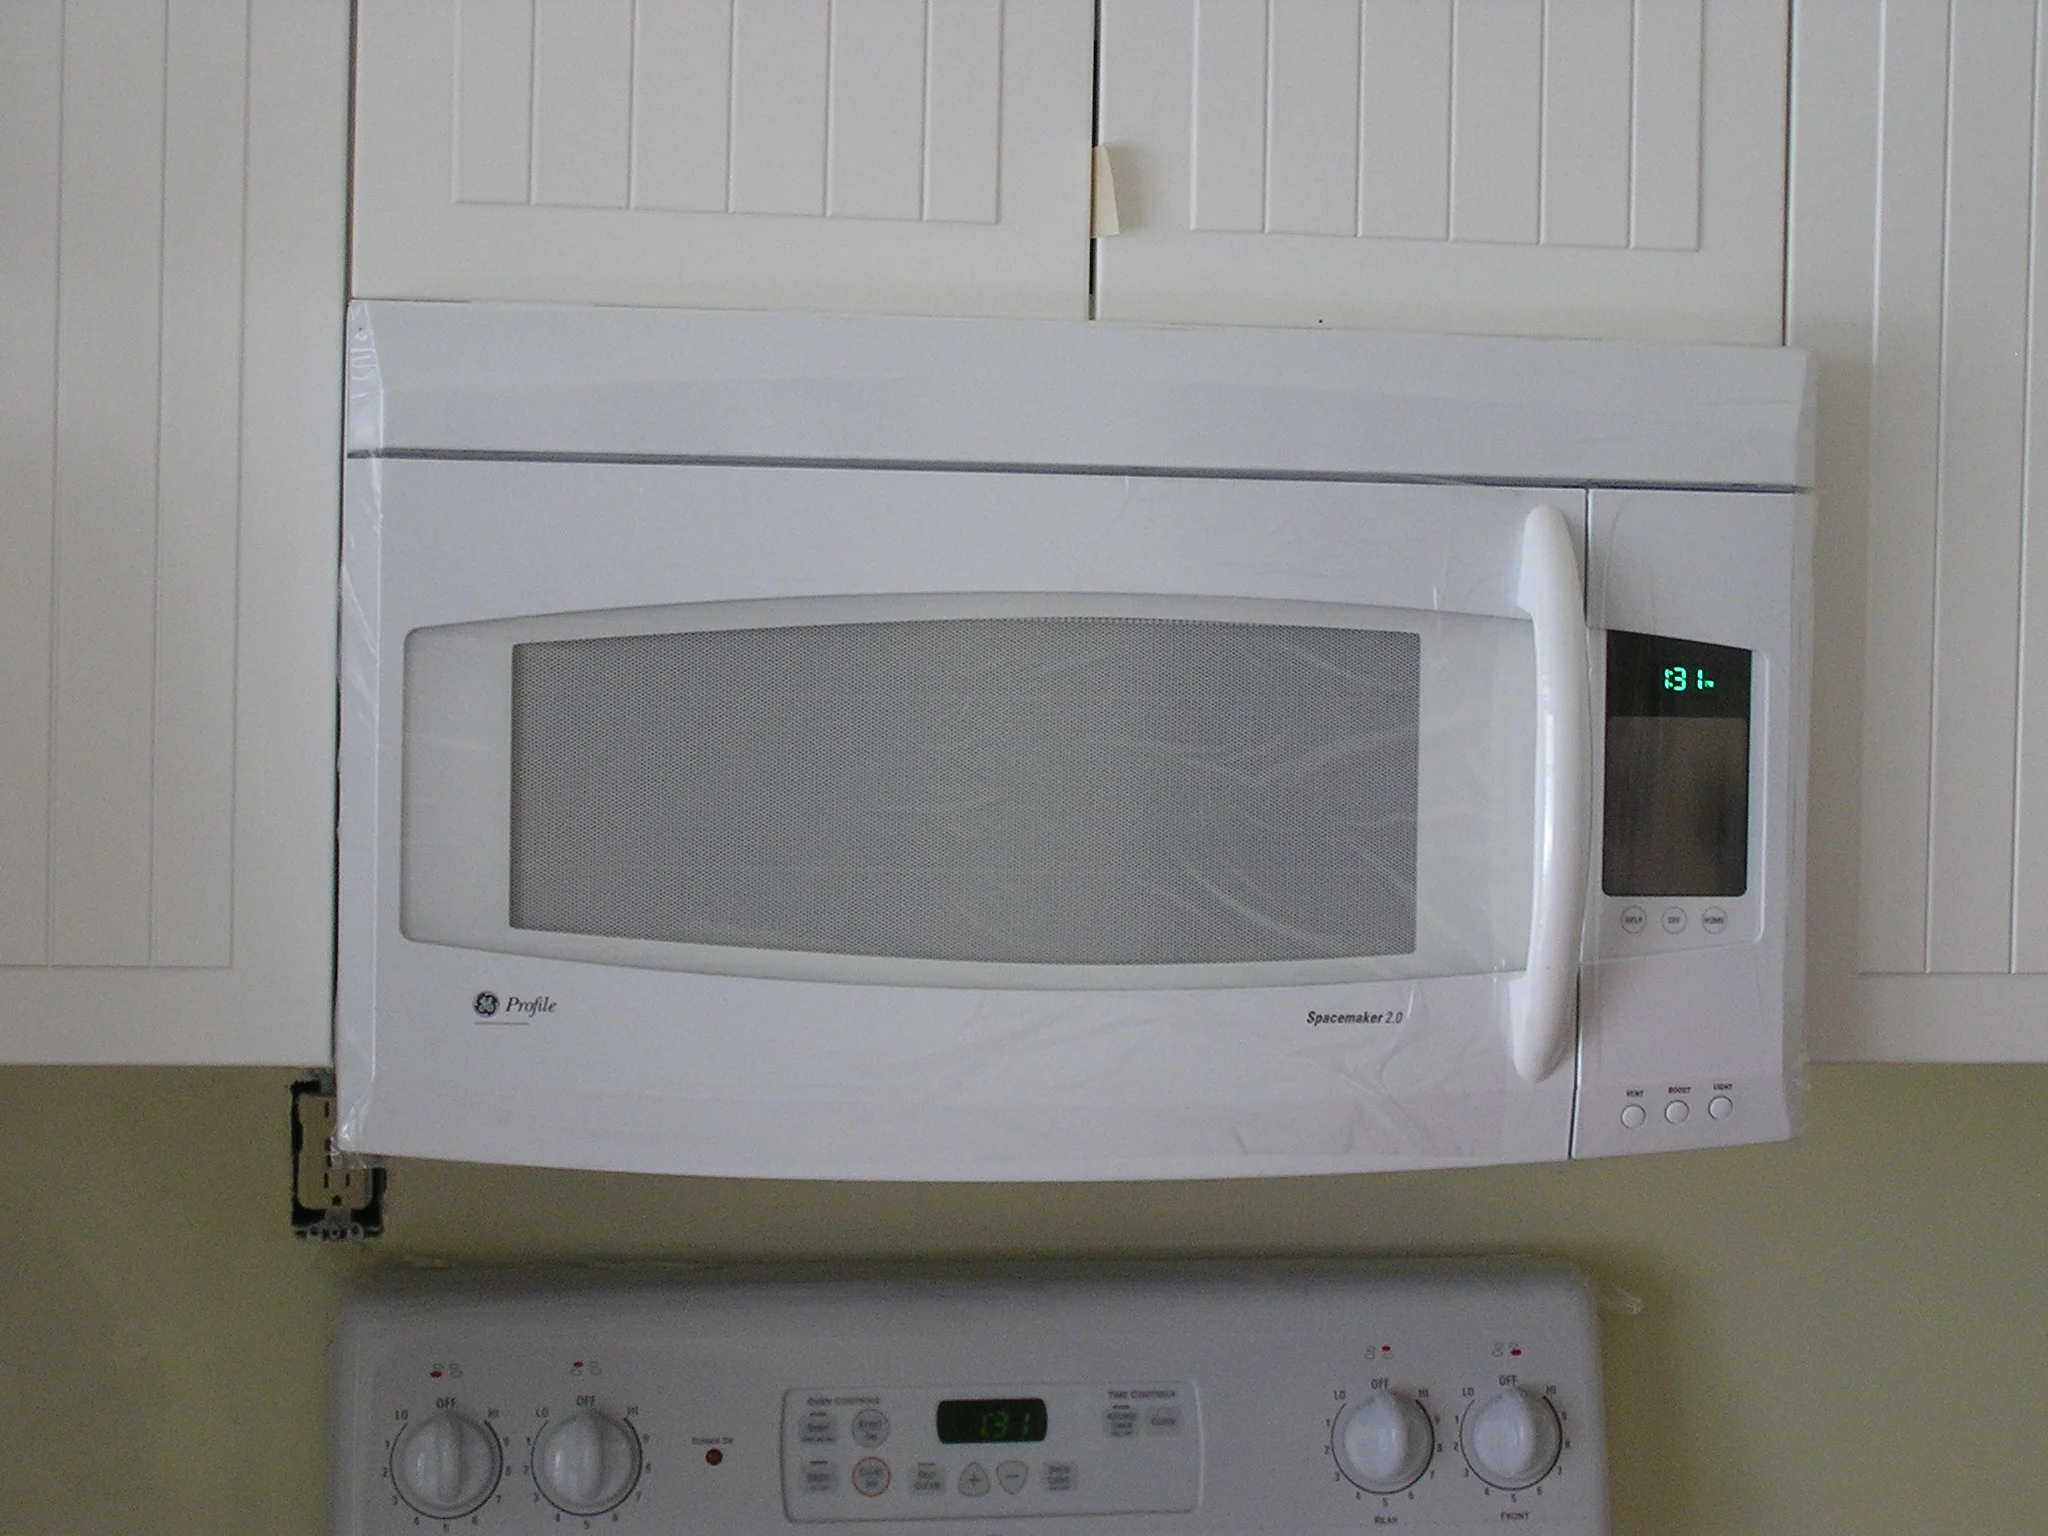 5 Reasons Why Your GE Microwave Not Working But Has Power